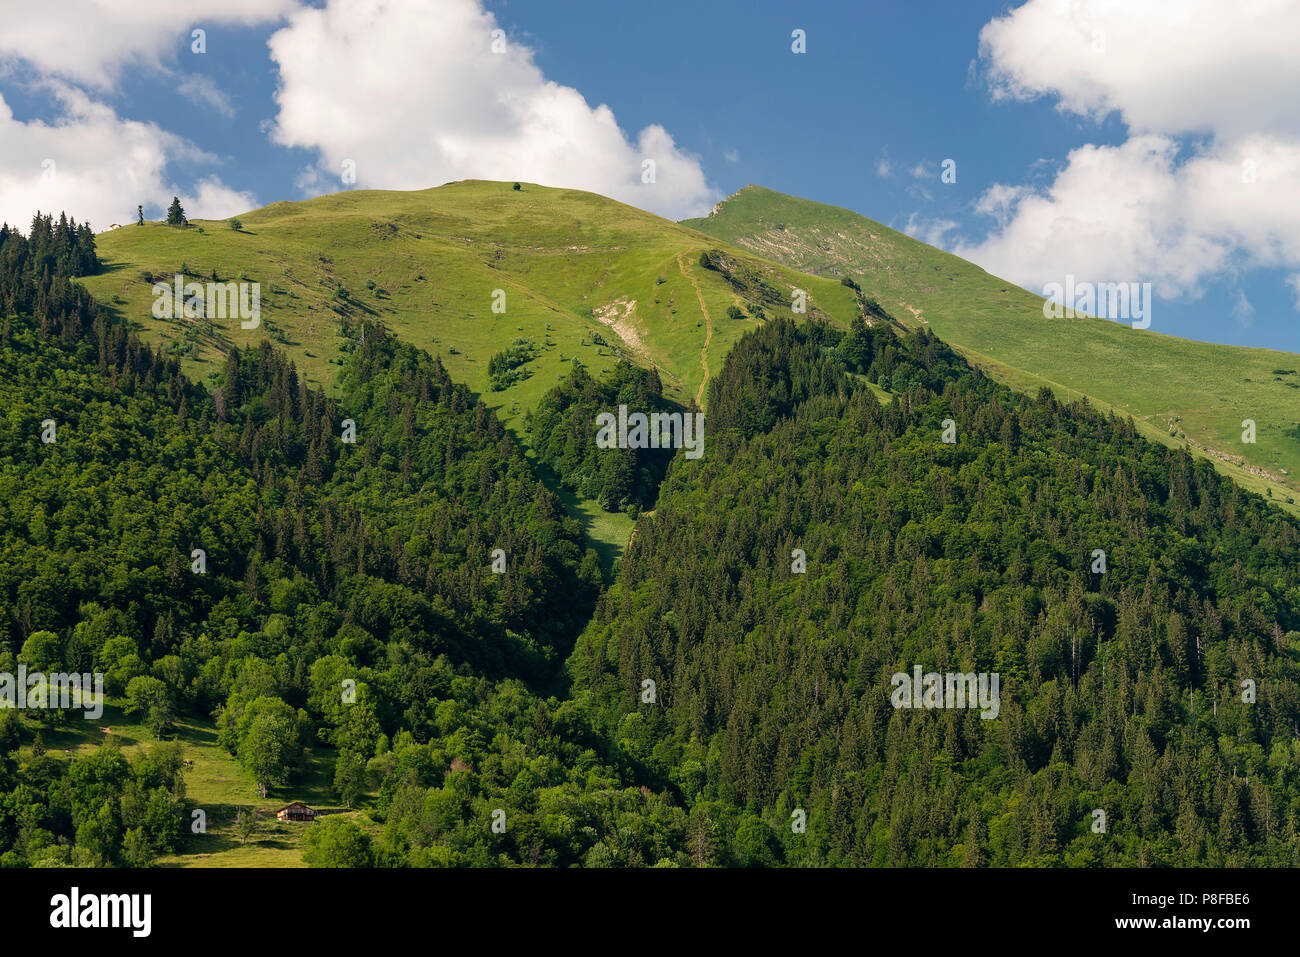 The Beautiful Pointe de Nantaux Mountain near Morzine with Pine Forest on its Slopeson a Summers Day Haute Savoie Portes du Soleil France Stock Photo